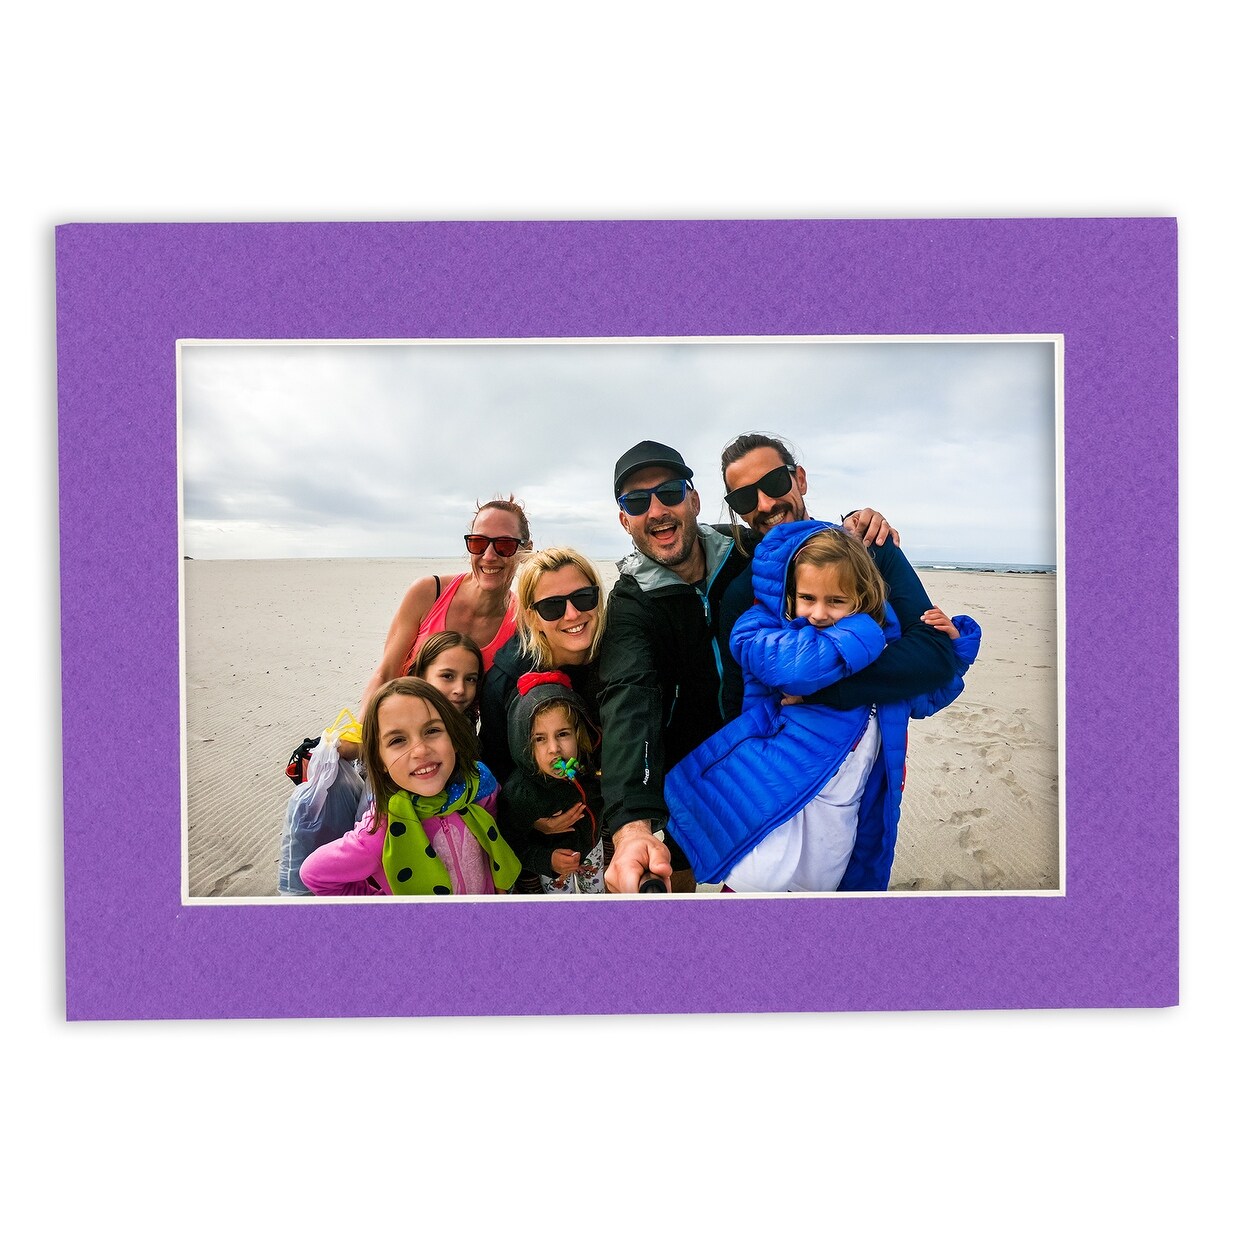 16x20 Mat for 8x10 Photo - Baby Blue Matboard for Frames Measuring 16 x 20 Inches - to Display Art Measuring 8 x 10 Inches